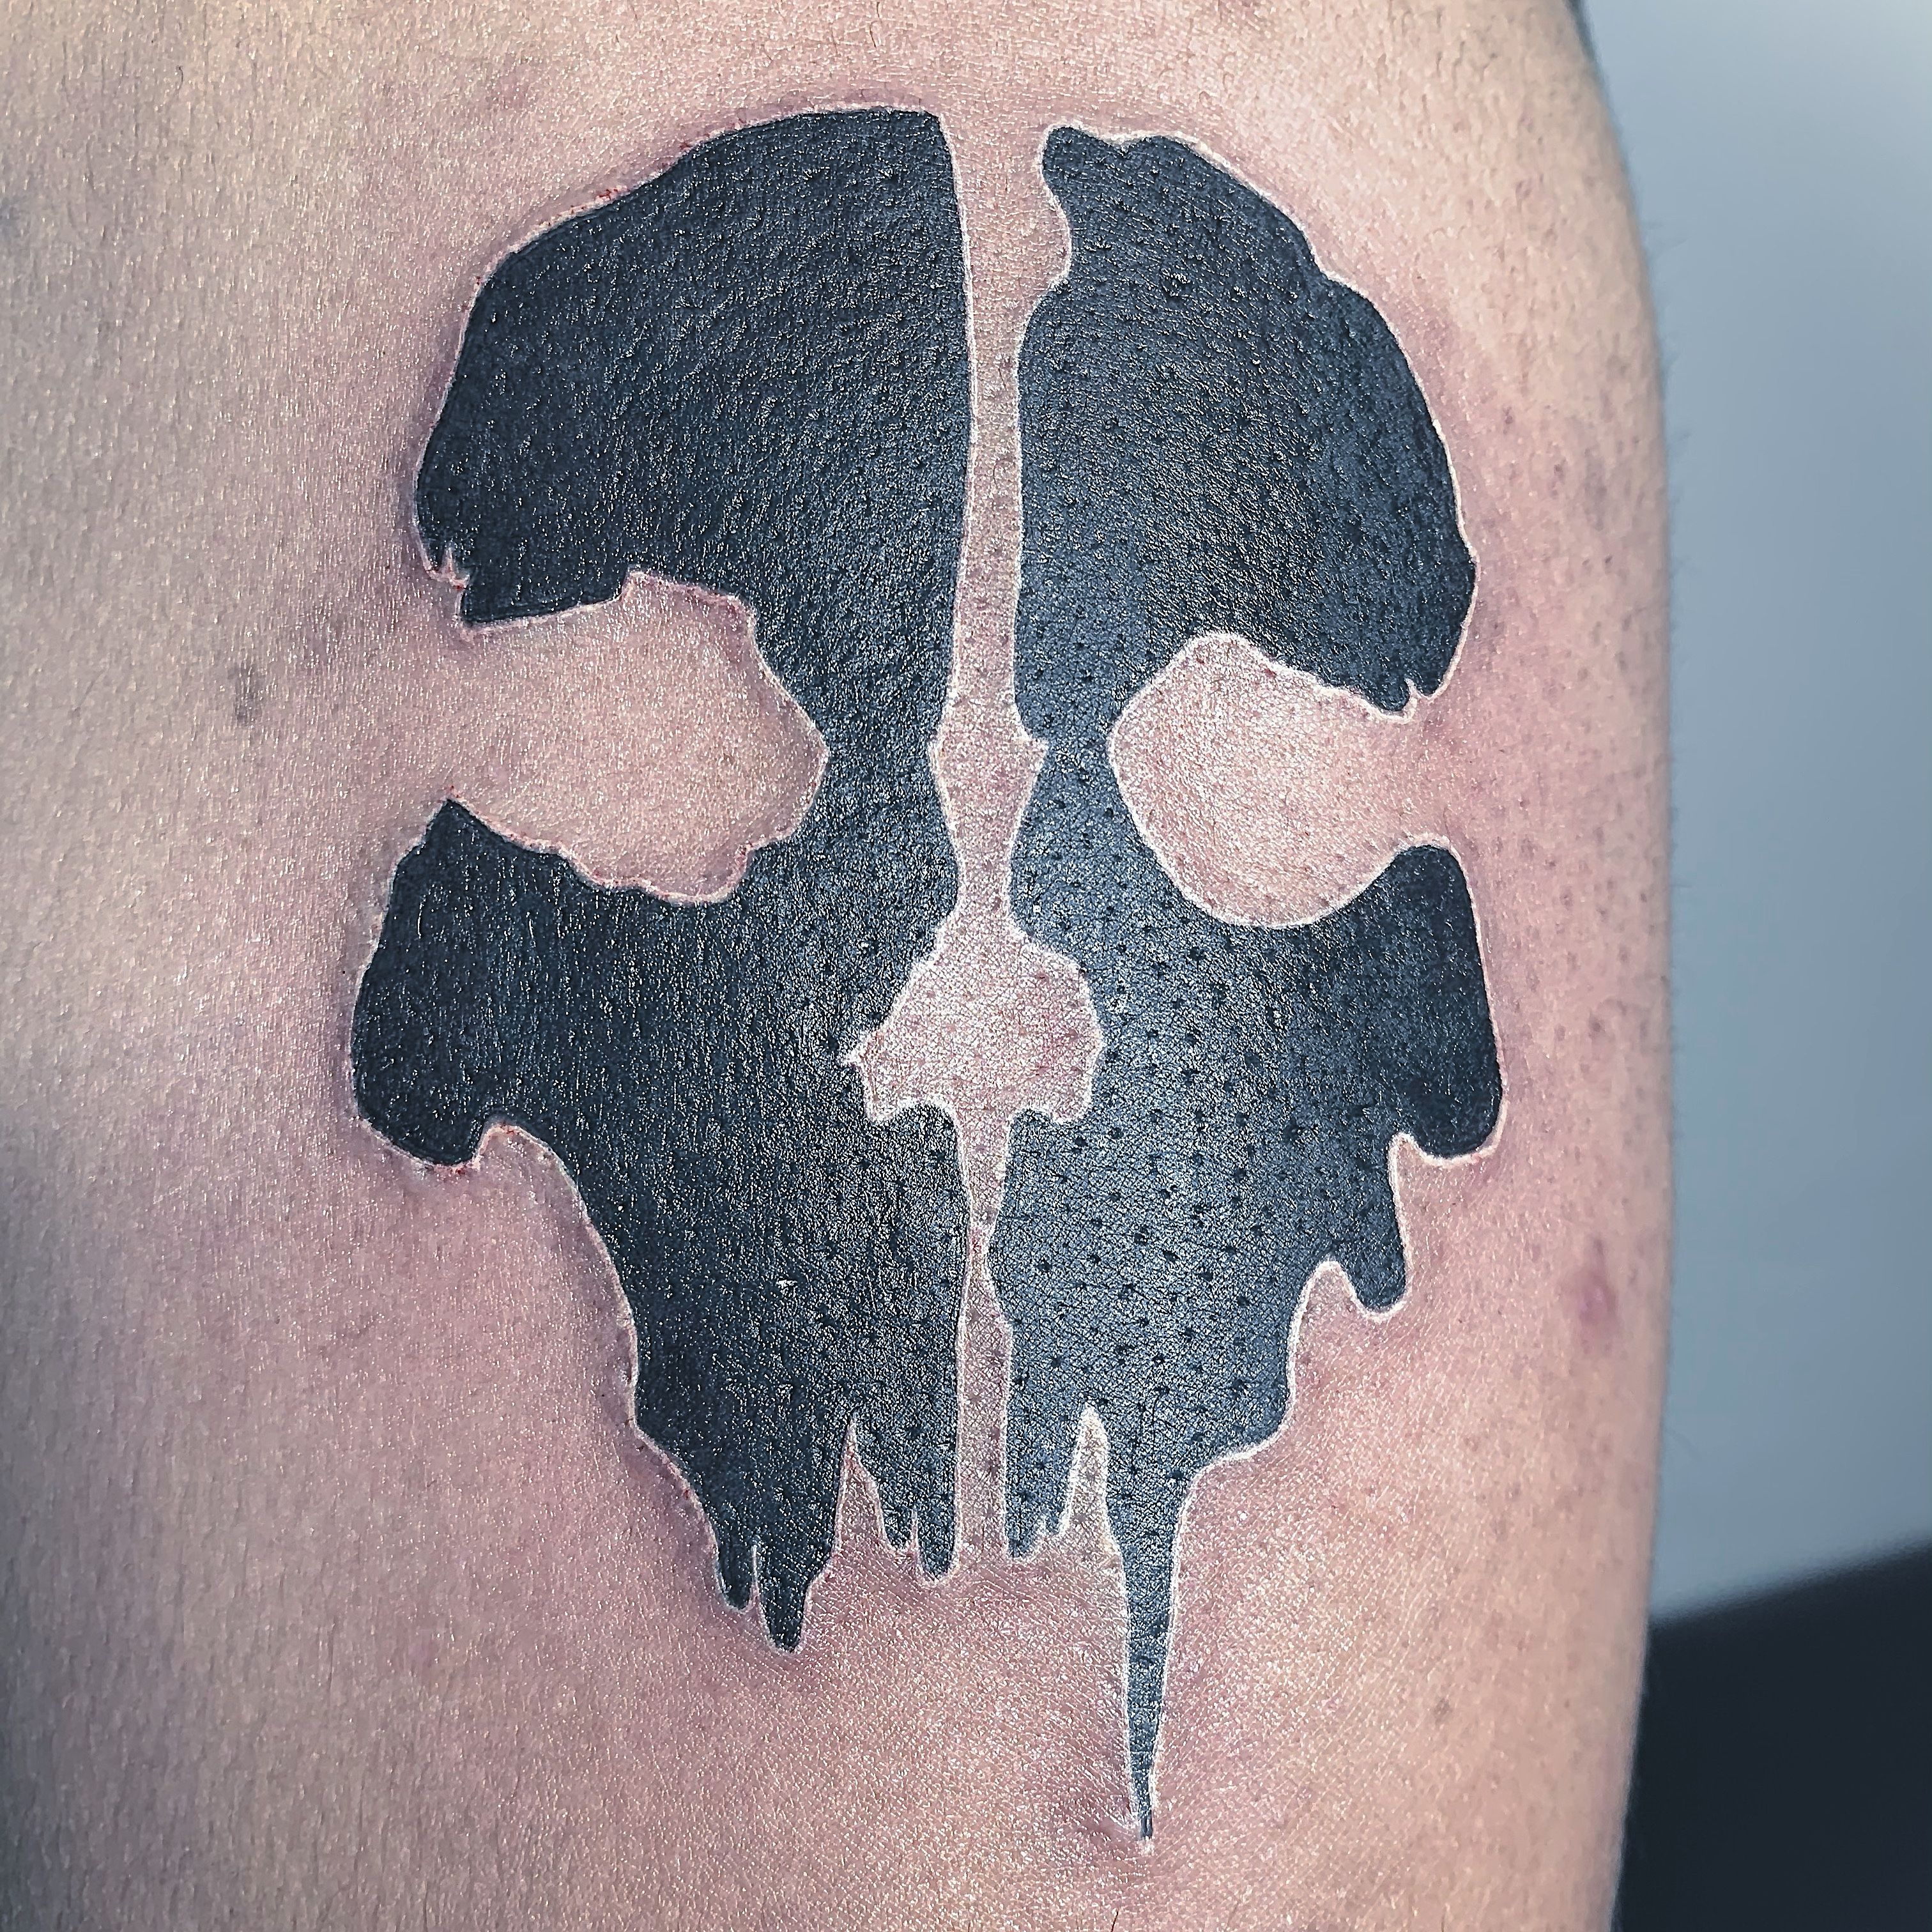 Call of Duty and Diablo tattoos that I did recently  rgaming